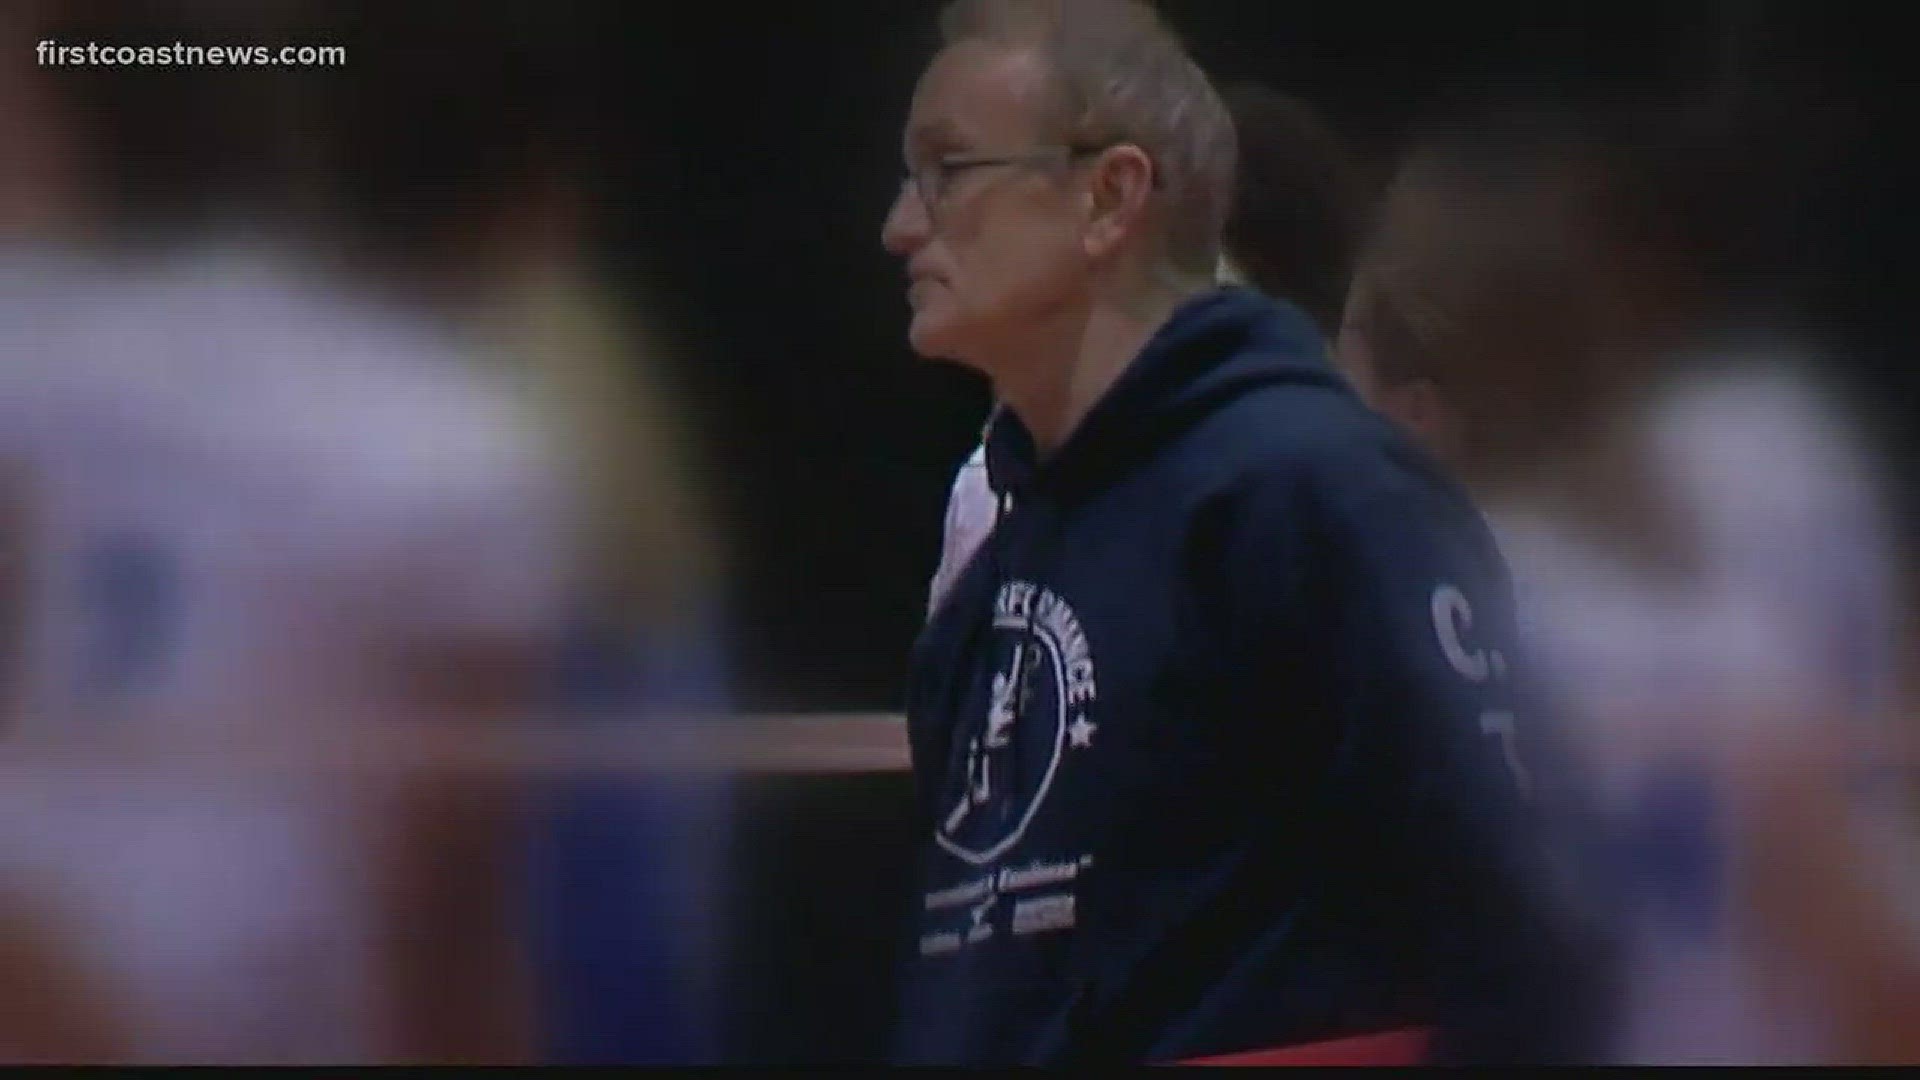 The USA Volleyball Association banned high-profile coach Rick Butler. He has been accused for decades of sexually abusing players, but he has never been charged with a crime.